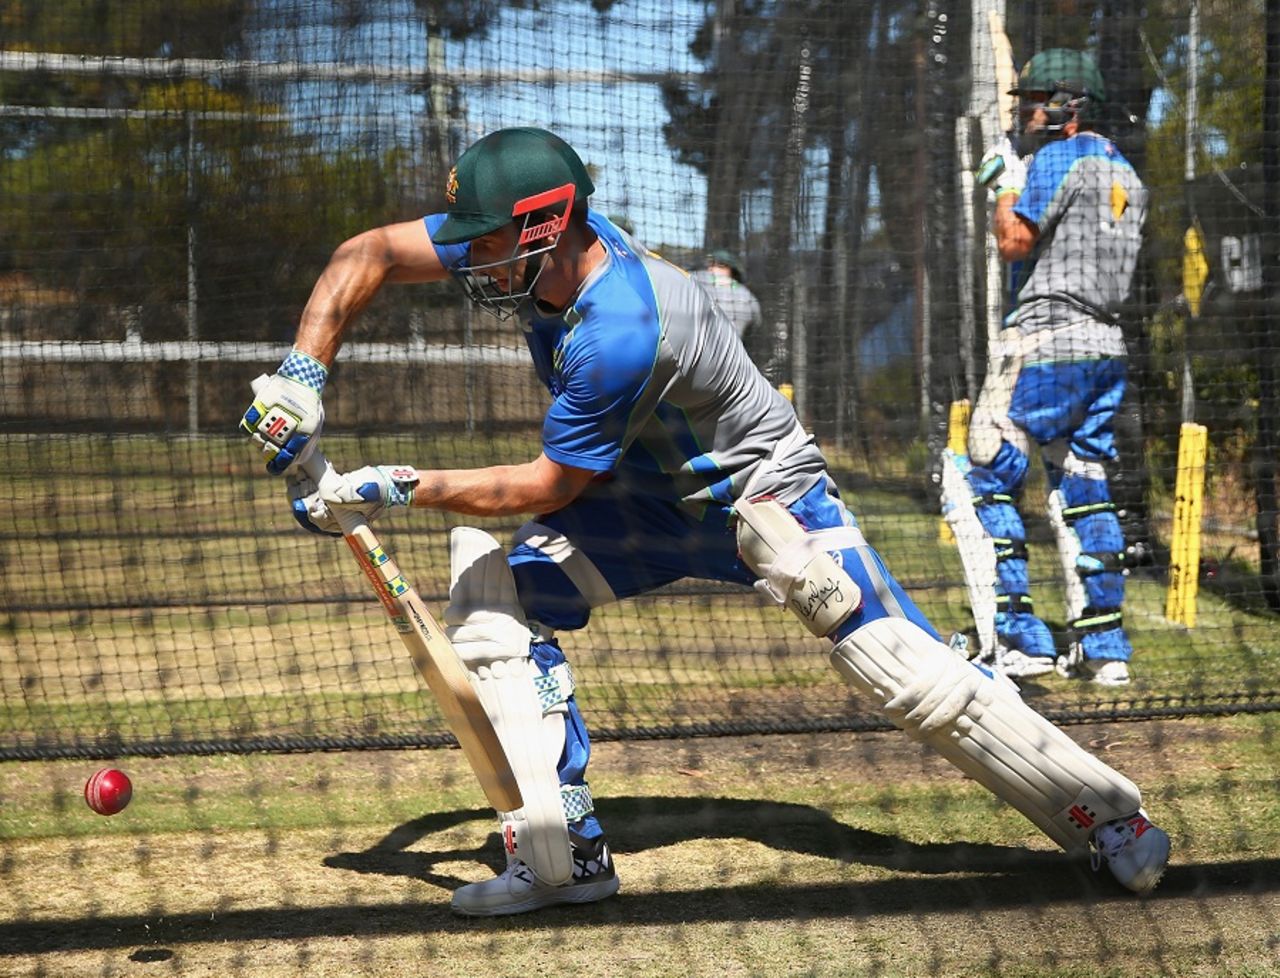 Shaun Marsh plays a defensive stroke in a practice session, Australia v West Indies, Hobart, December 9, 2015